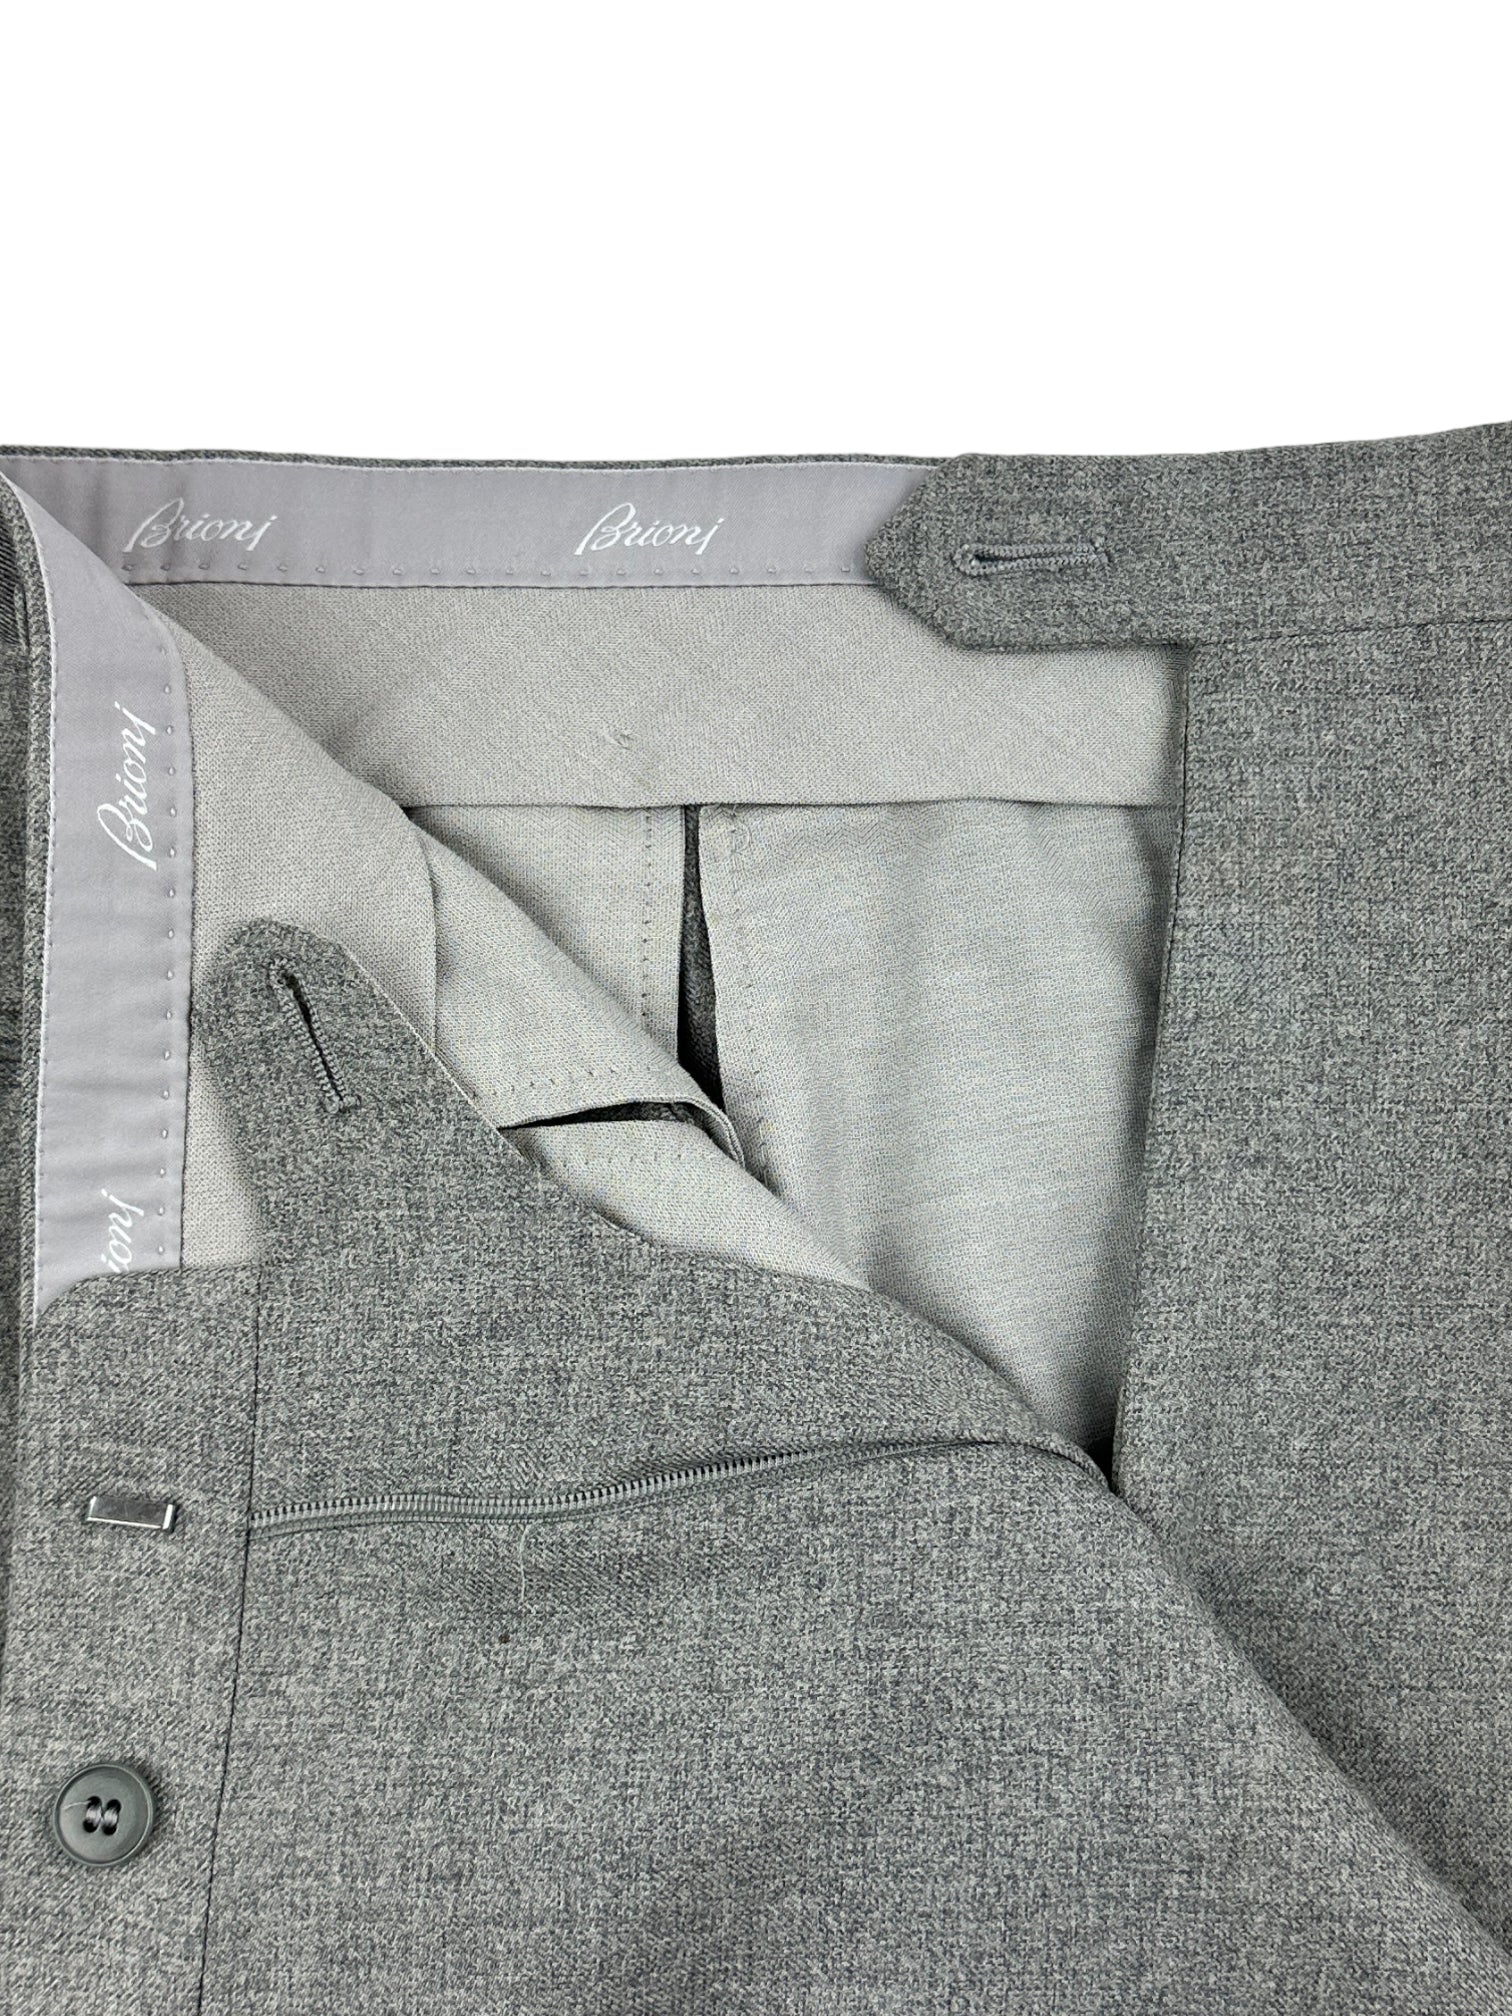 Brioni Light Grey Flannel Trousers